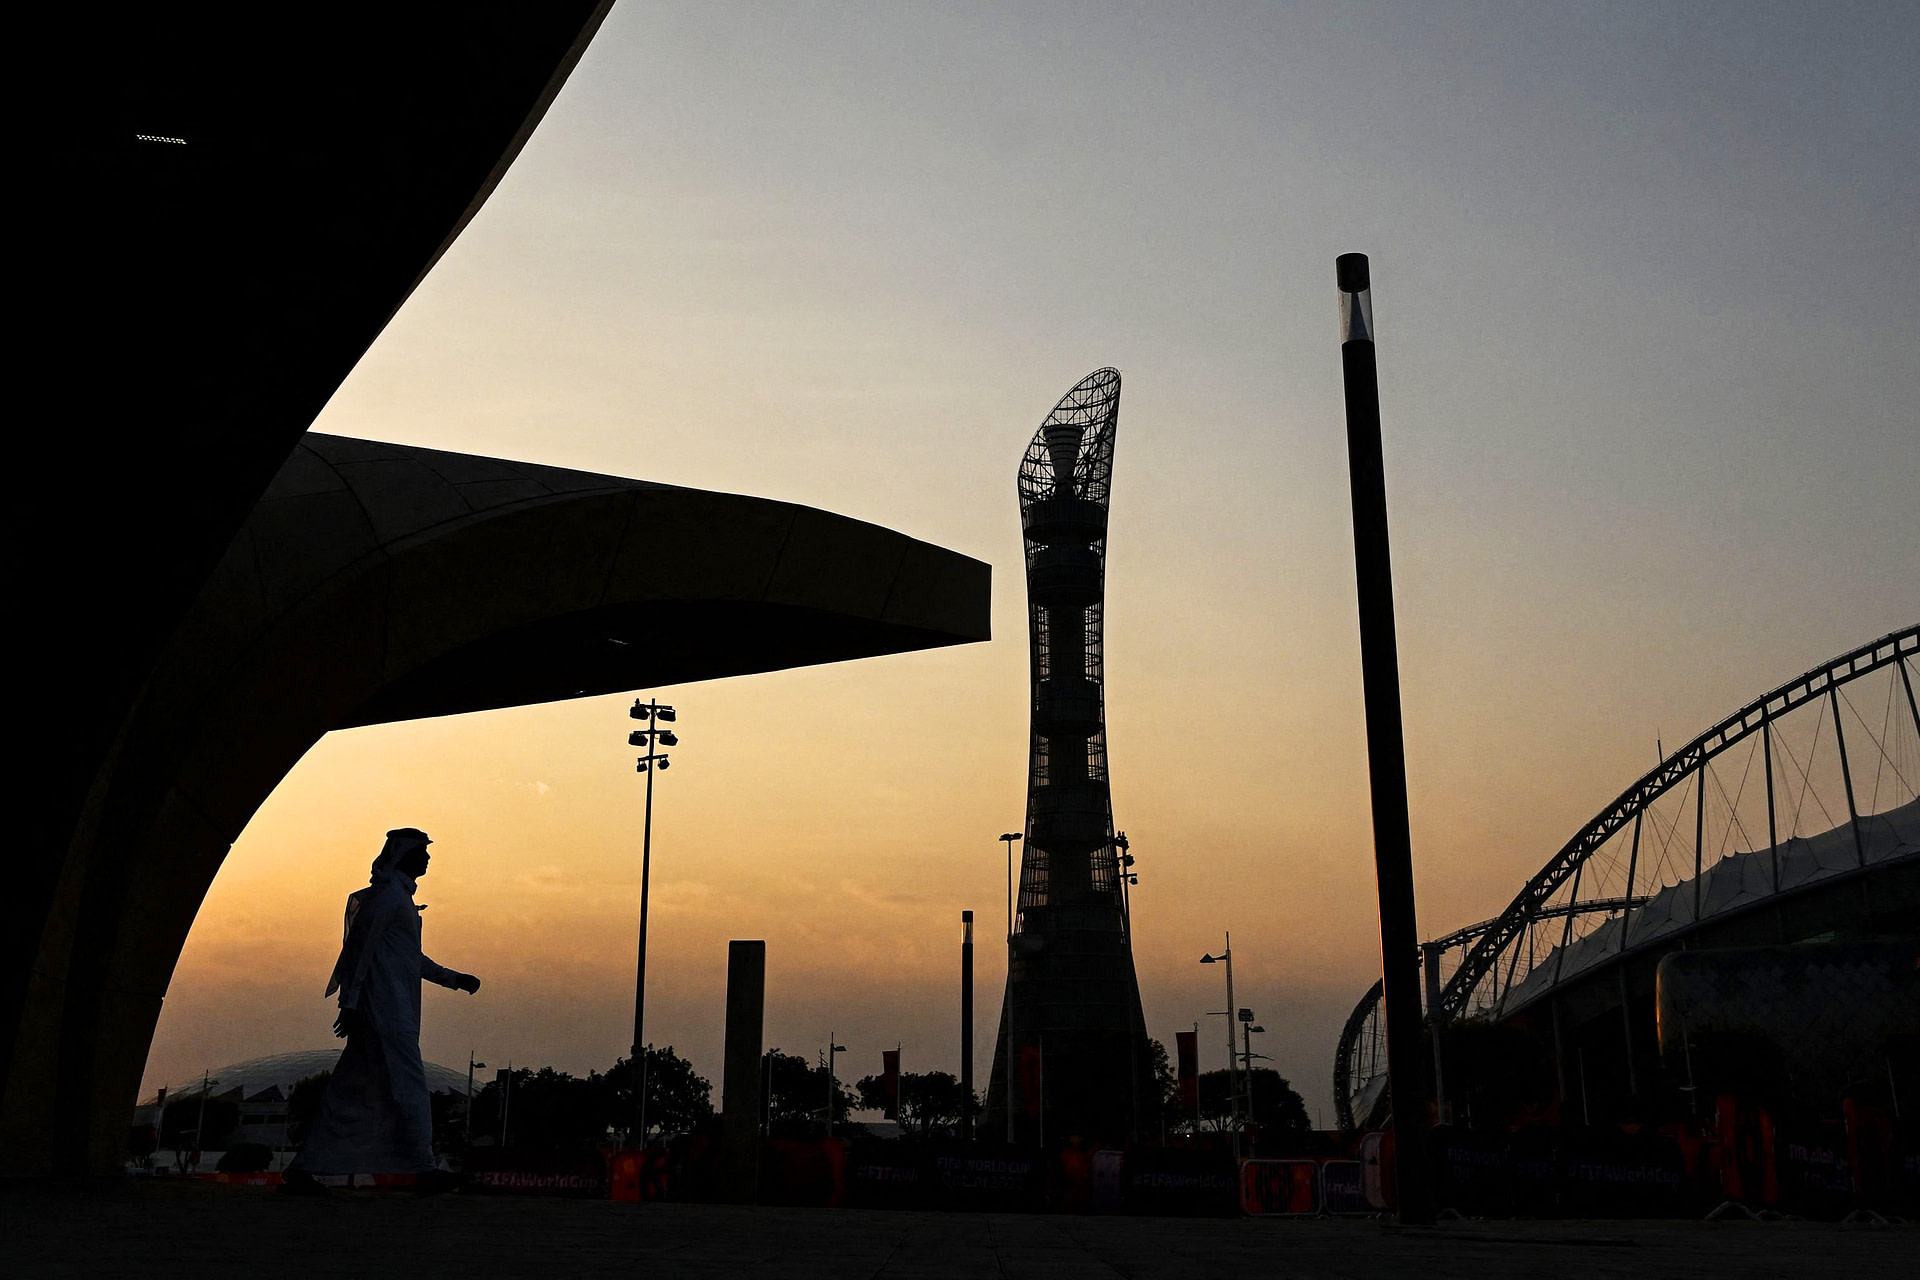 Qatar World Cup ambassador says homosexuality is ‘damage in the mind’